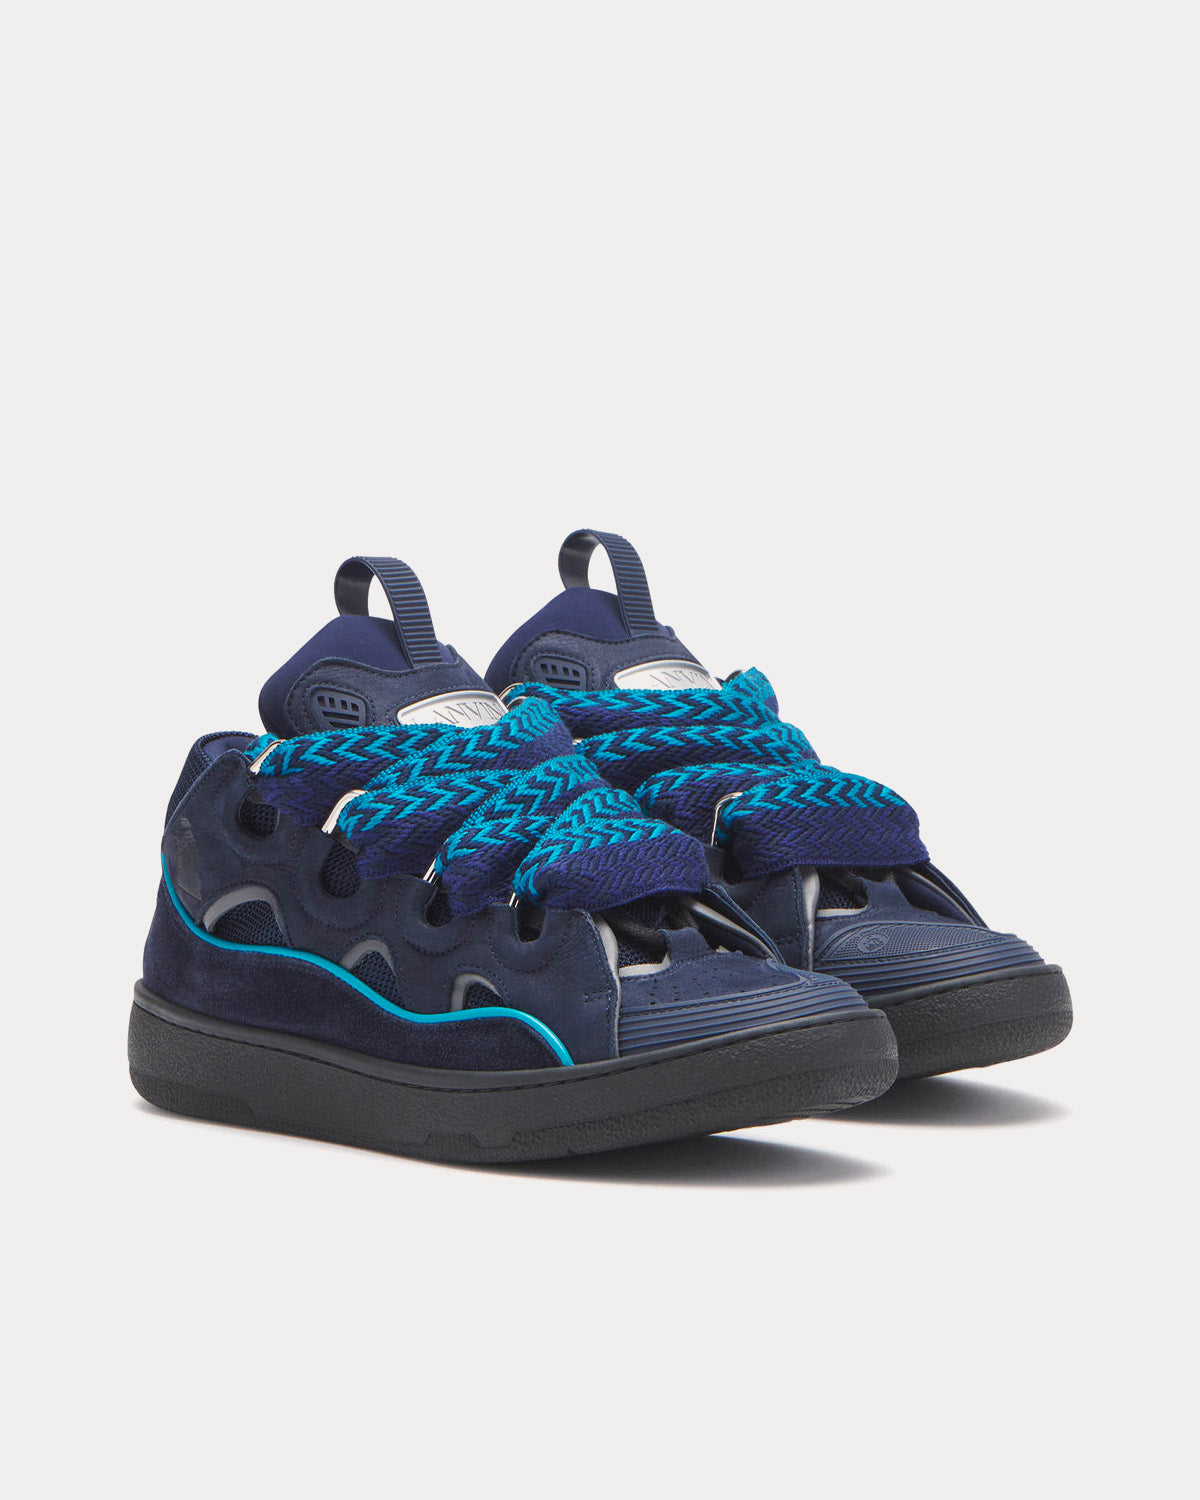 Lanvin - Curb Leather Navy Blue Low Top Sneakers